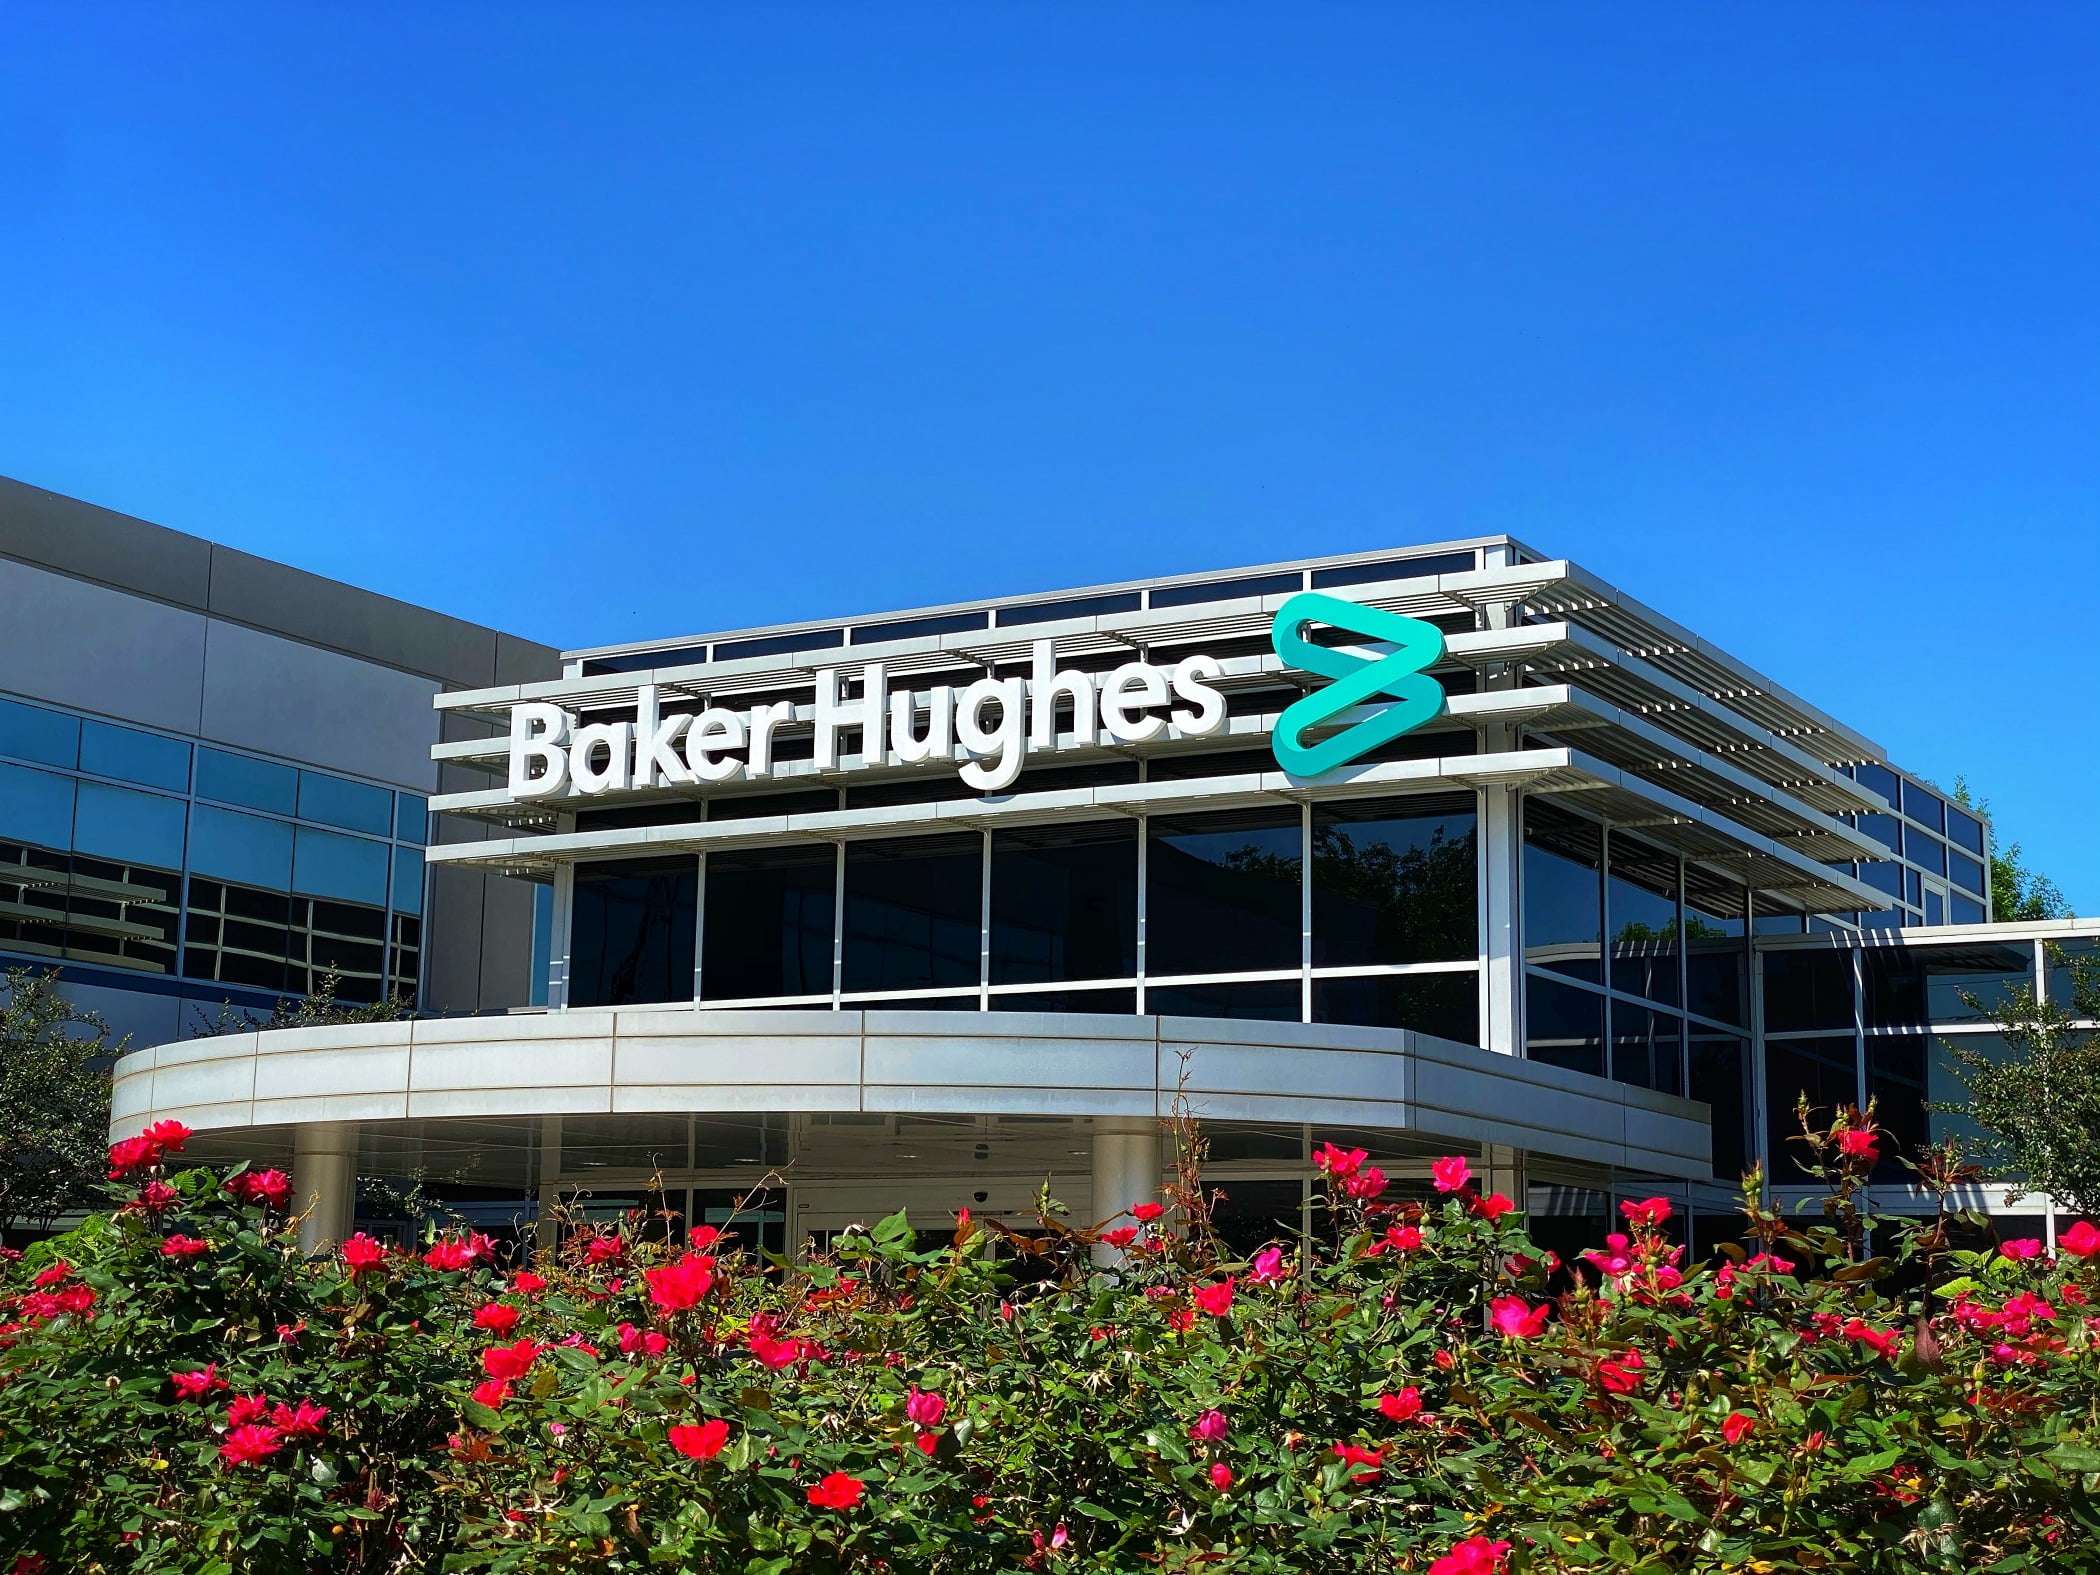 Baker Hughes U.S. headquarters campus in Houston pictured here is one building on a multi-site campus. Photo courtesy of Baker Hughes